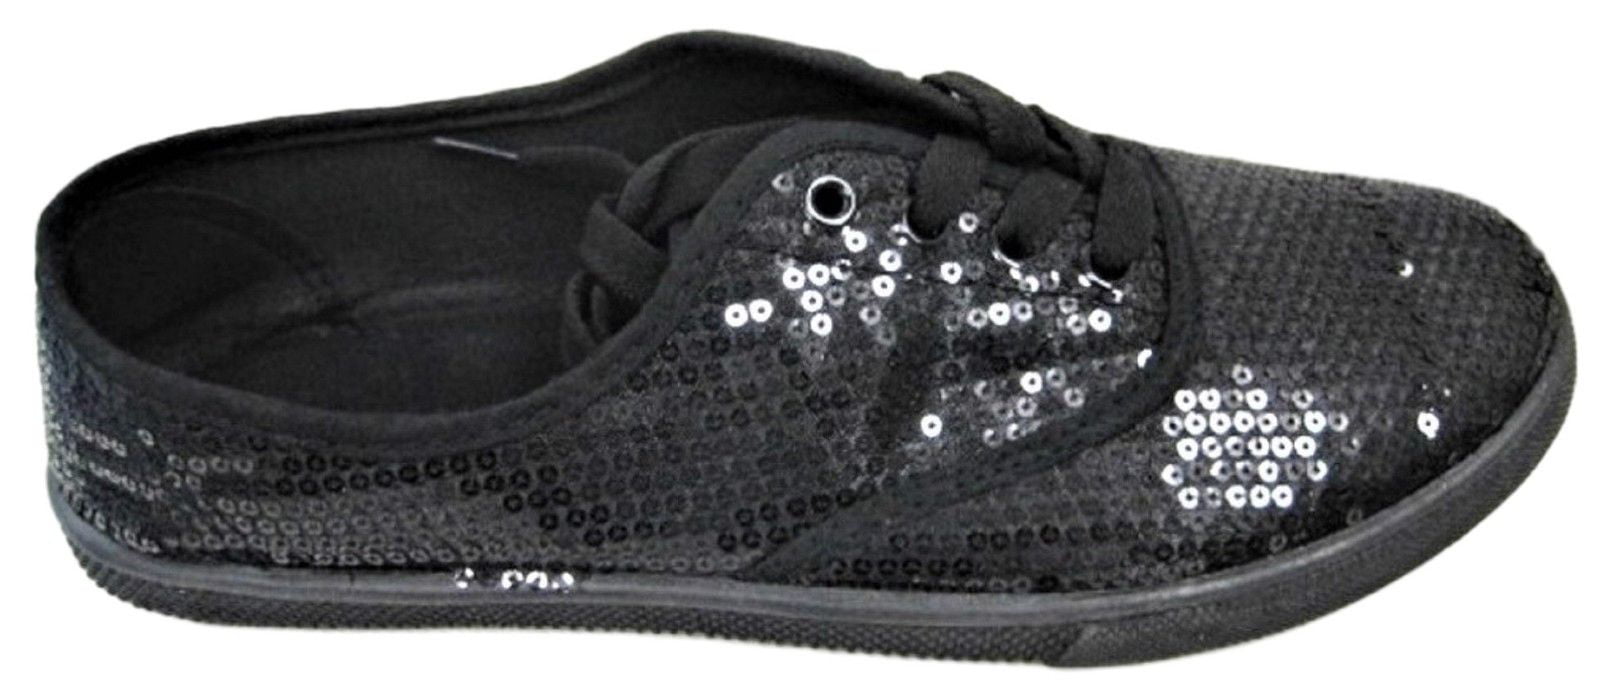 sparkly womens tennis shoes